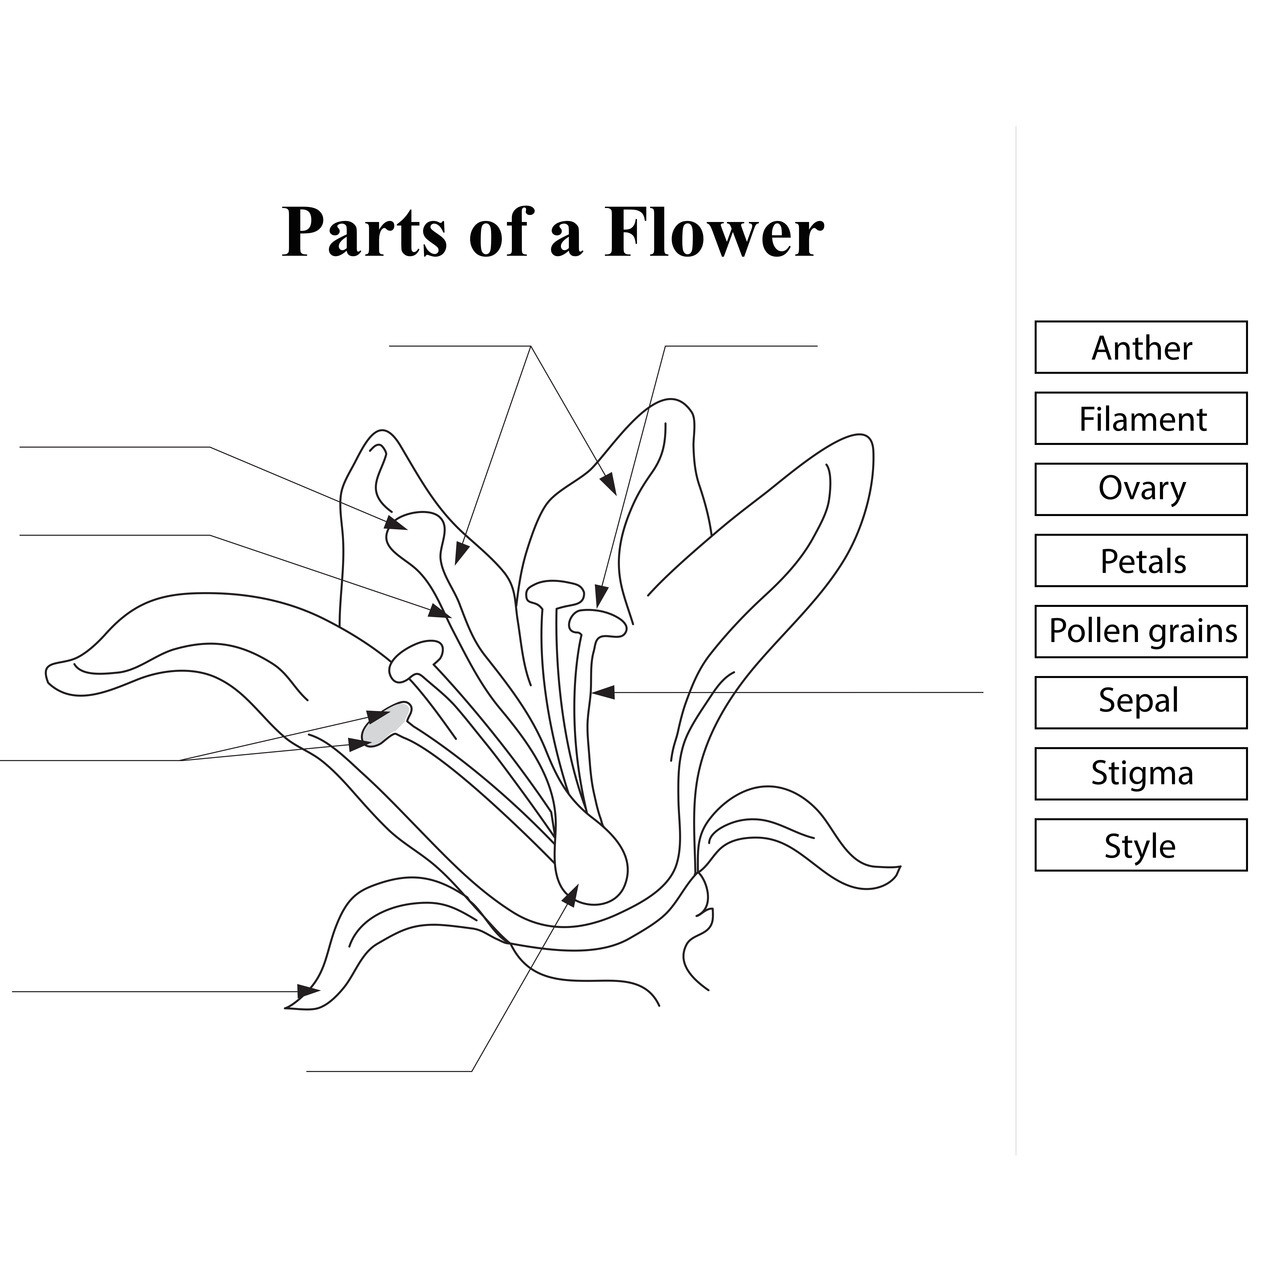 Download Parts of a Flower - AgClassroomStore at USU